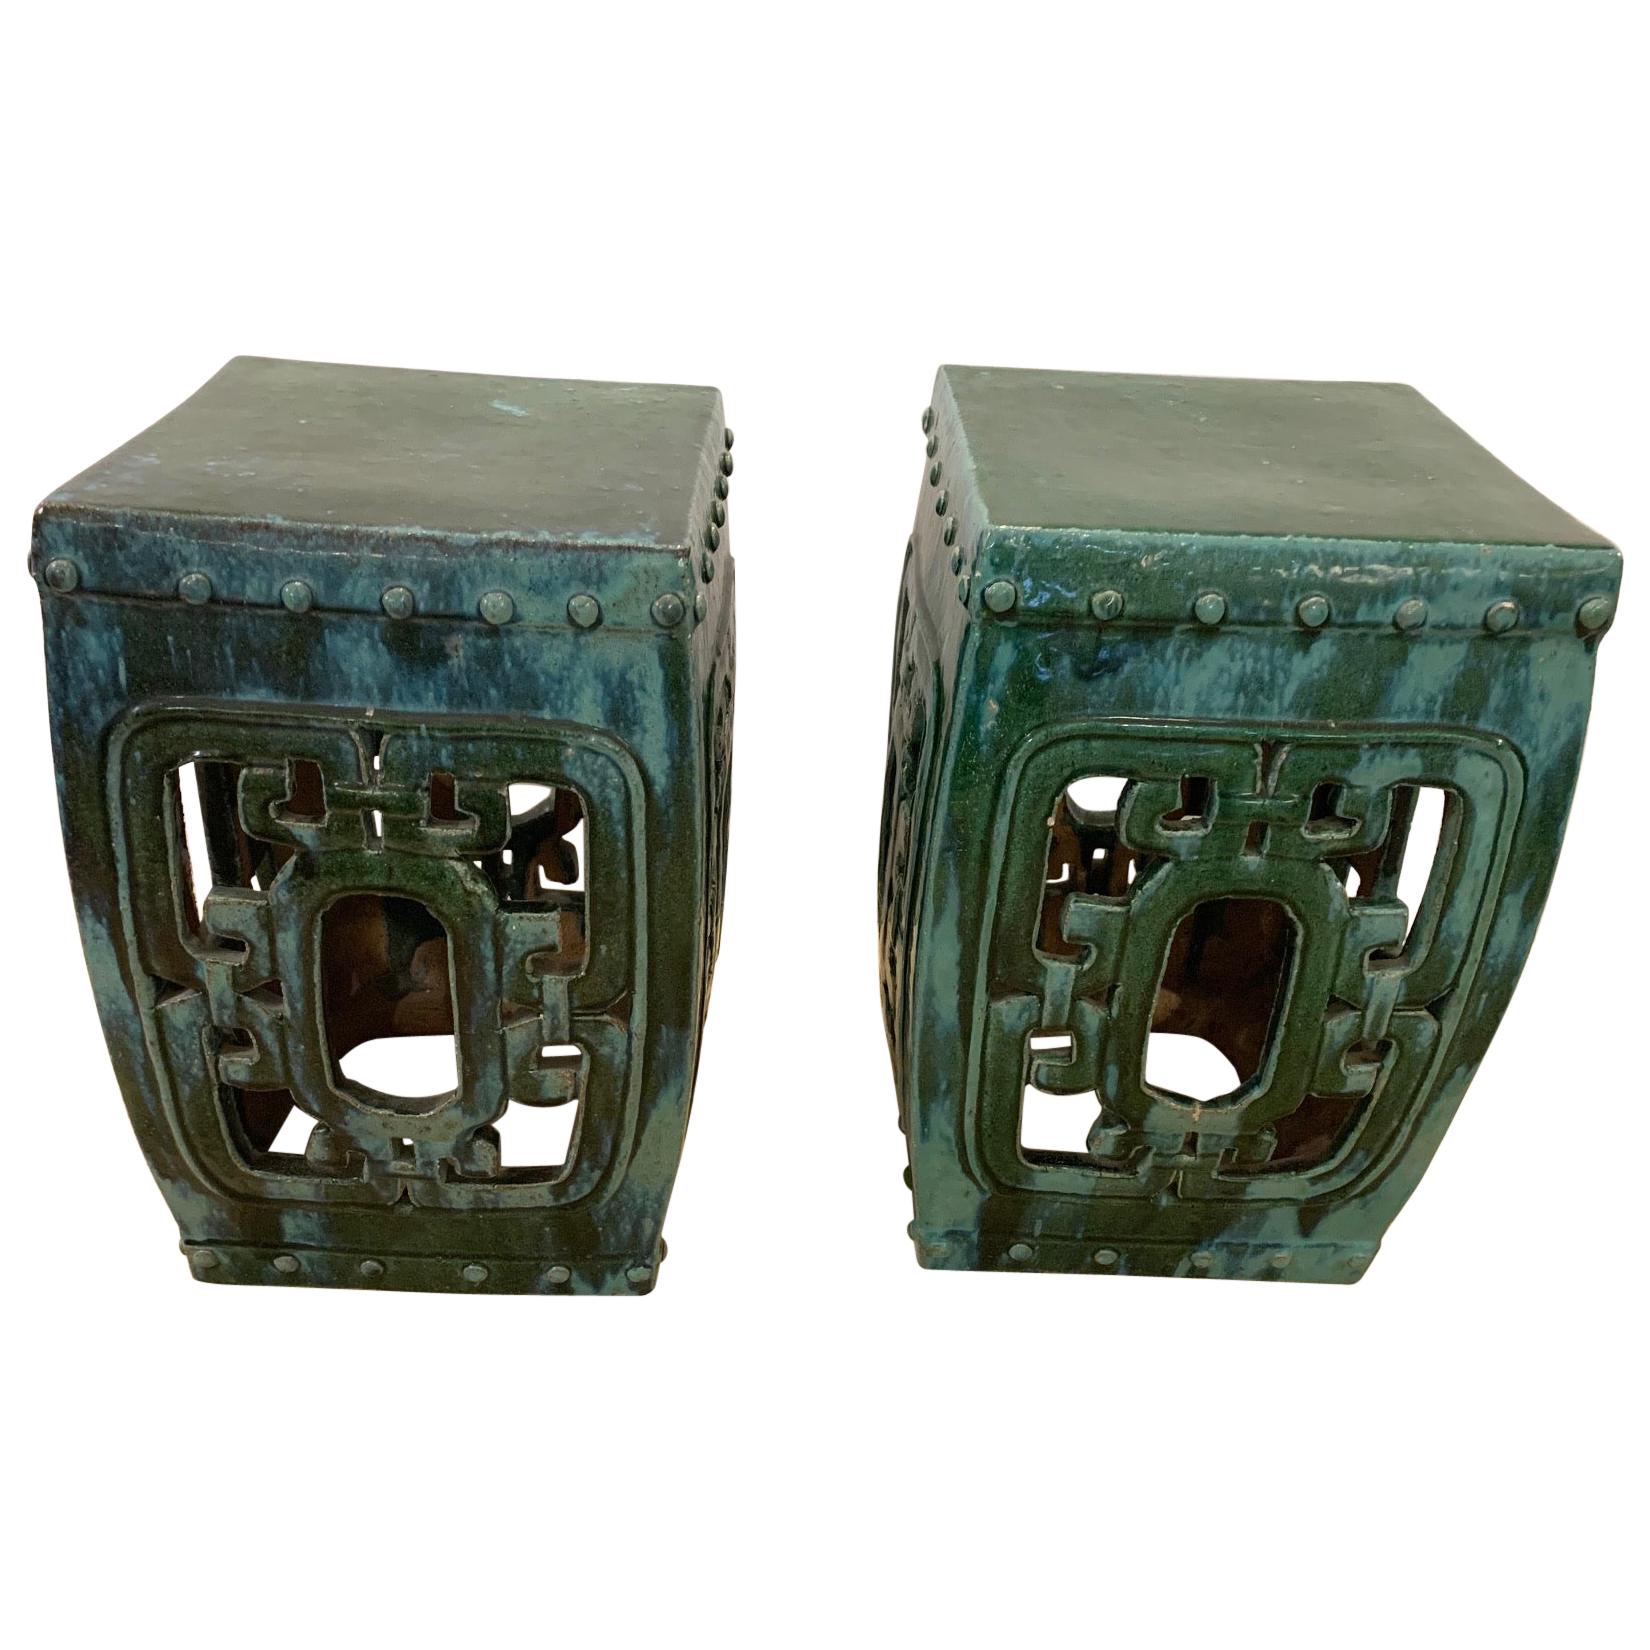 Chic Pair of Green Glazed Ceramic Asian Square End Table Garden Seats